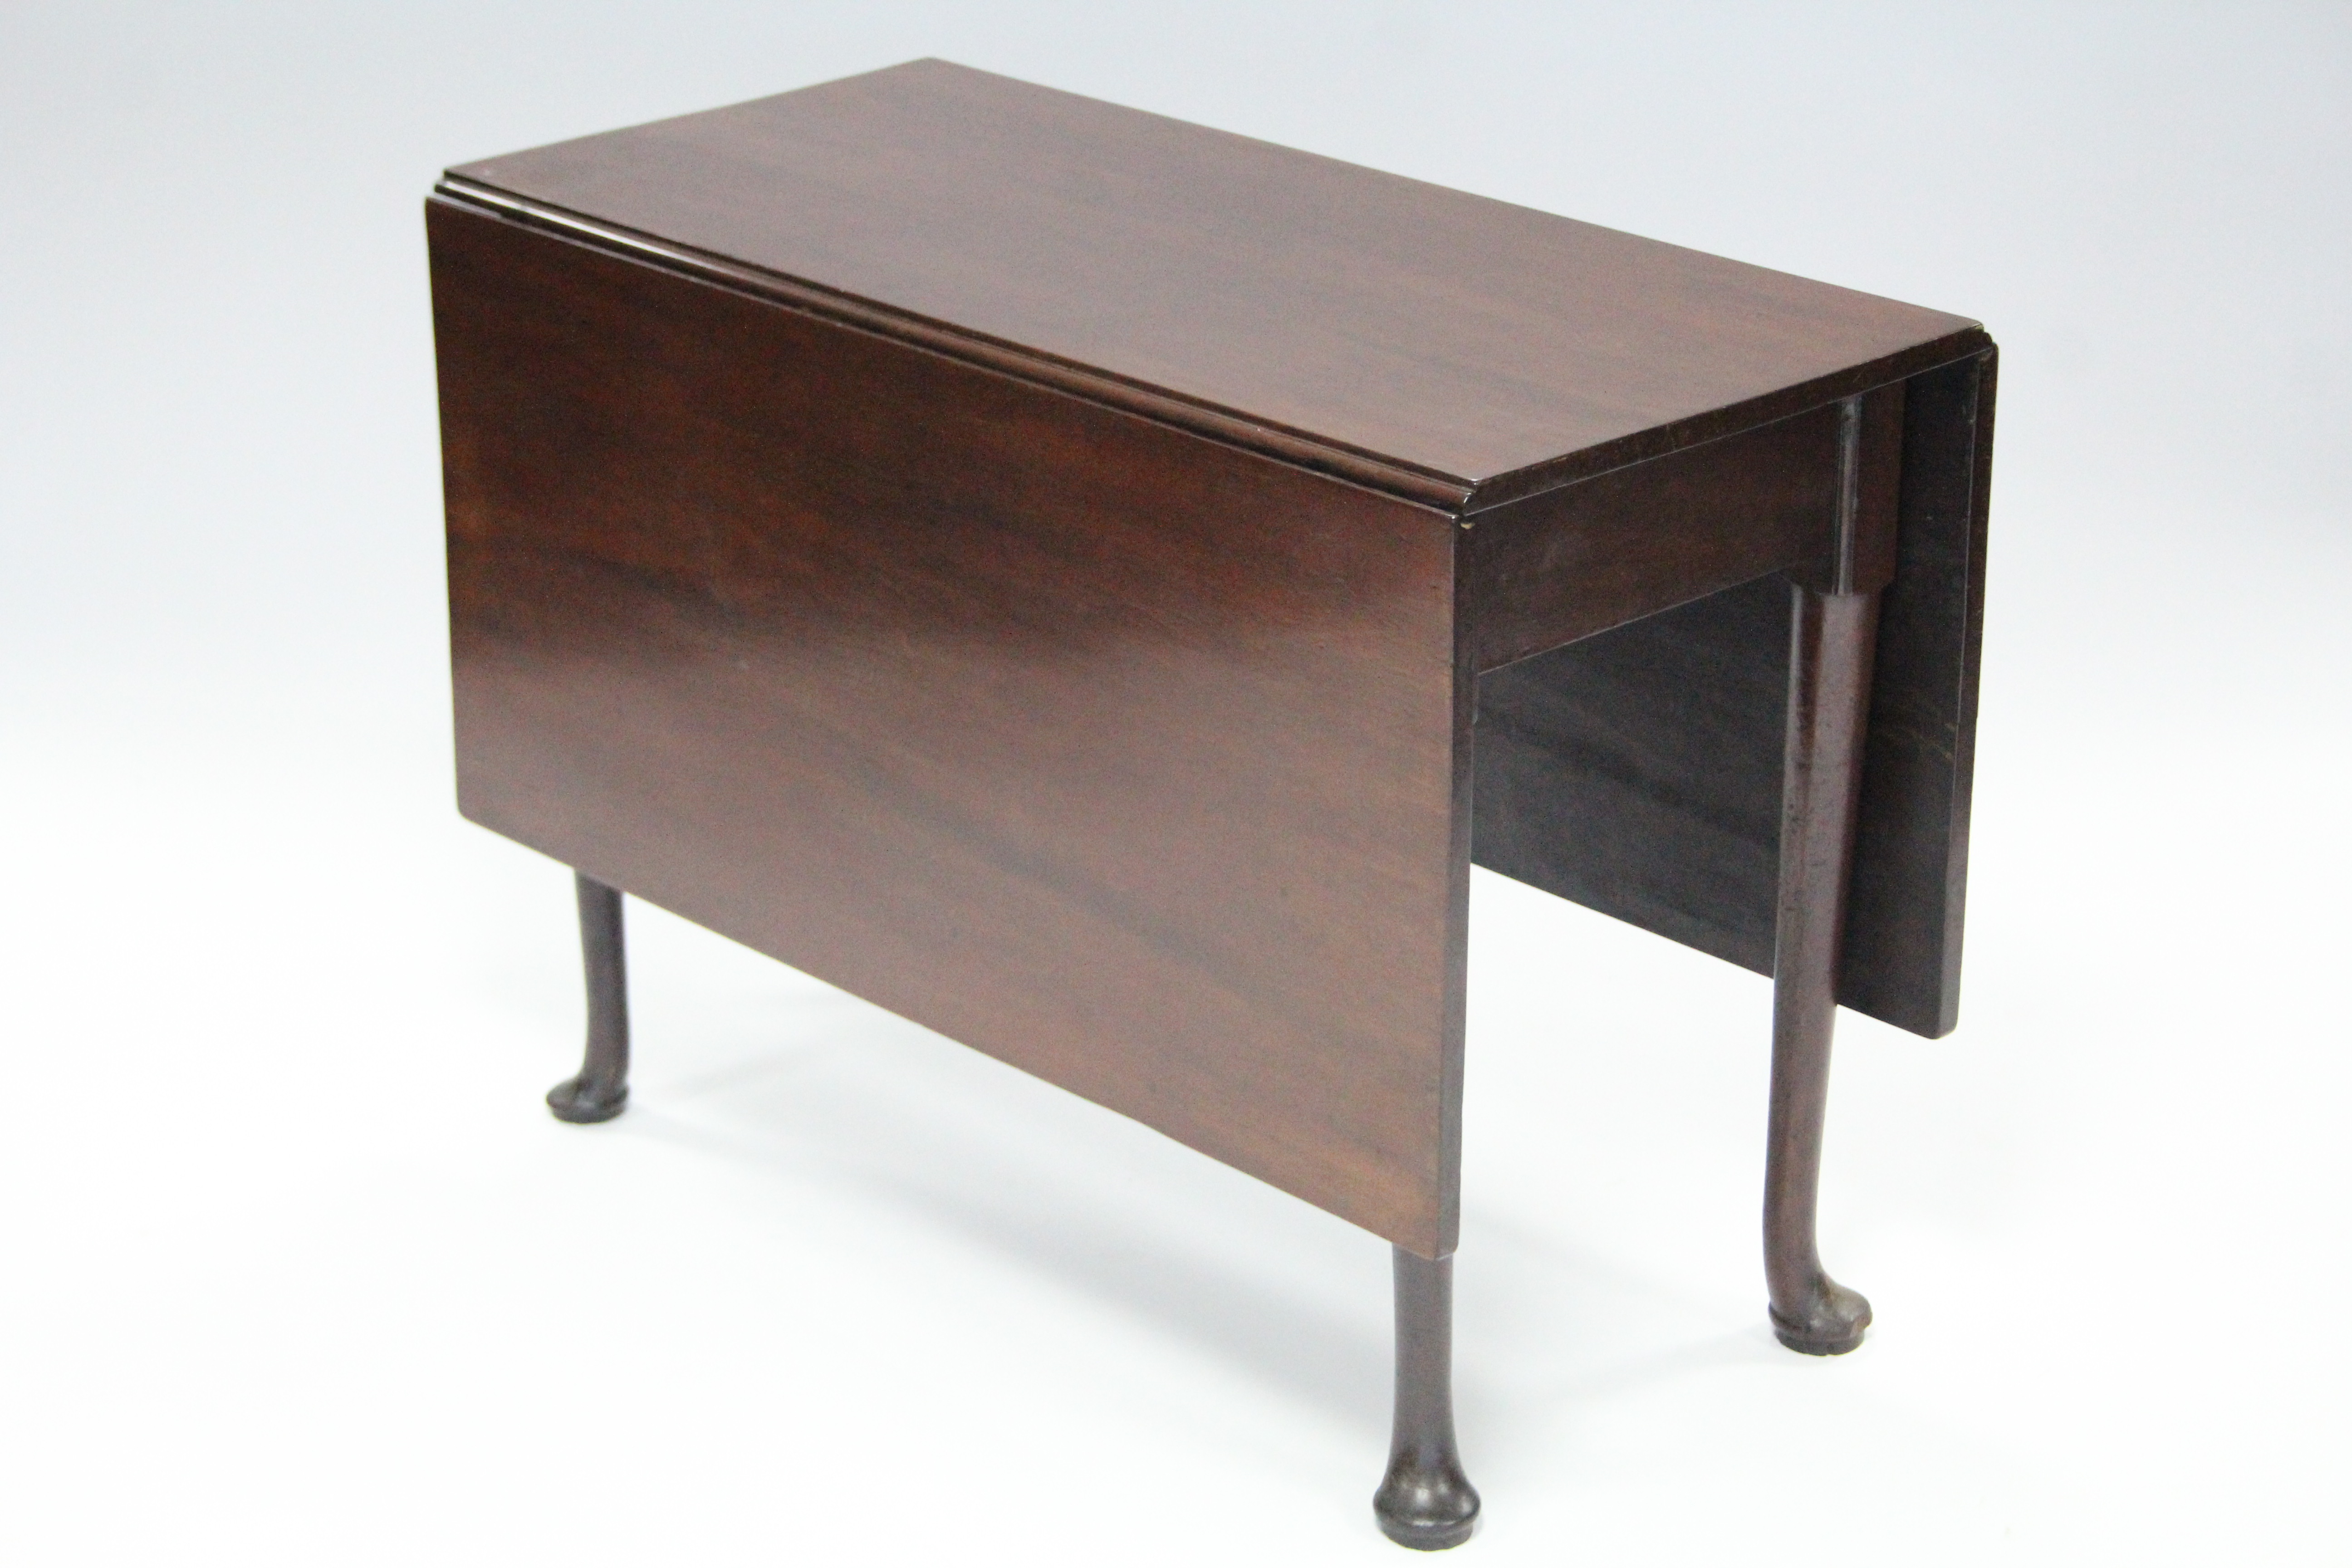 An early 19th century mahogany drop-leaf supper table, the rectangular top on four slender tapered